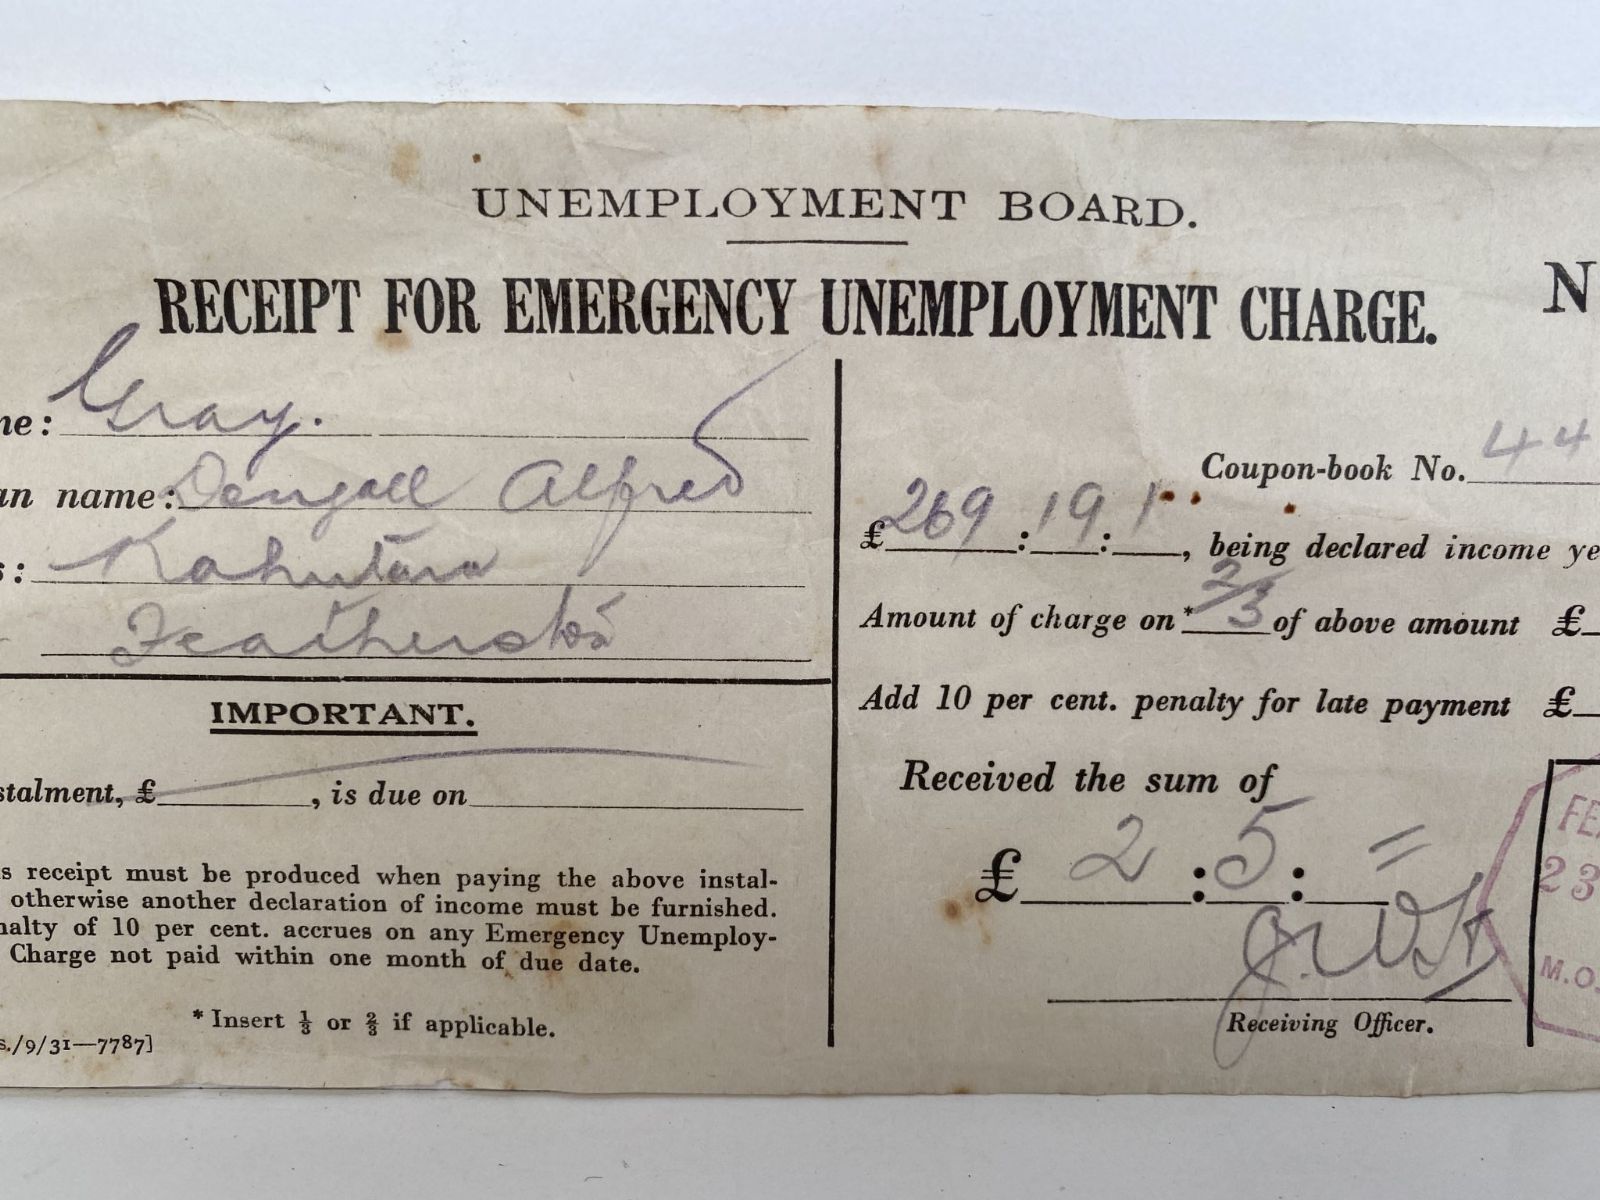 OLD RECEIPT: Issued by Unemployment Board for Emergency Unemployment Charge 1931